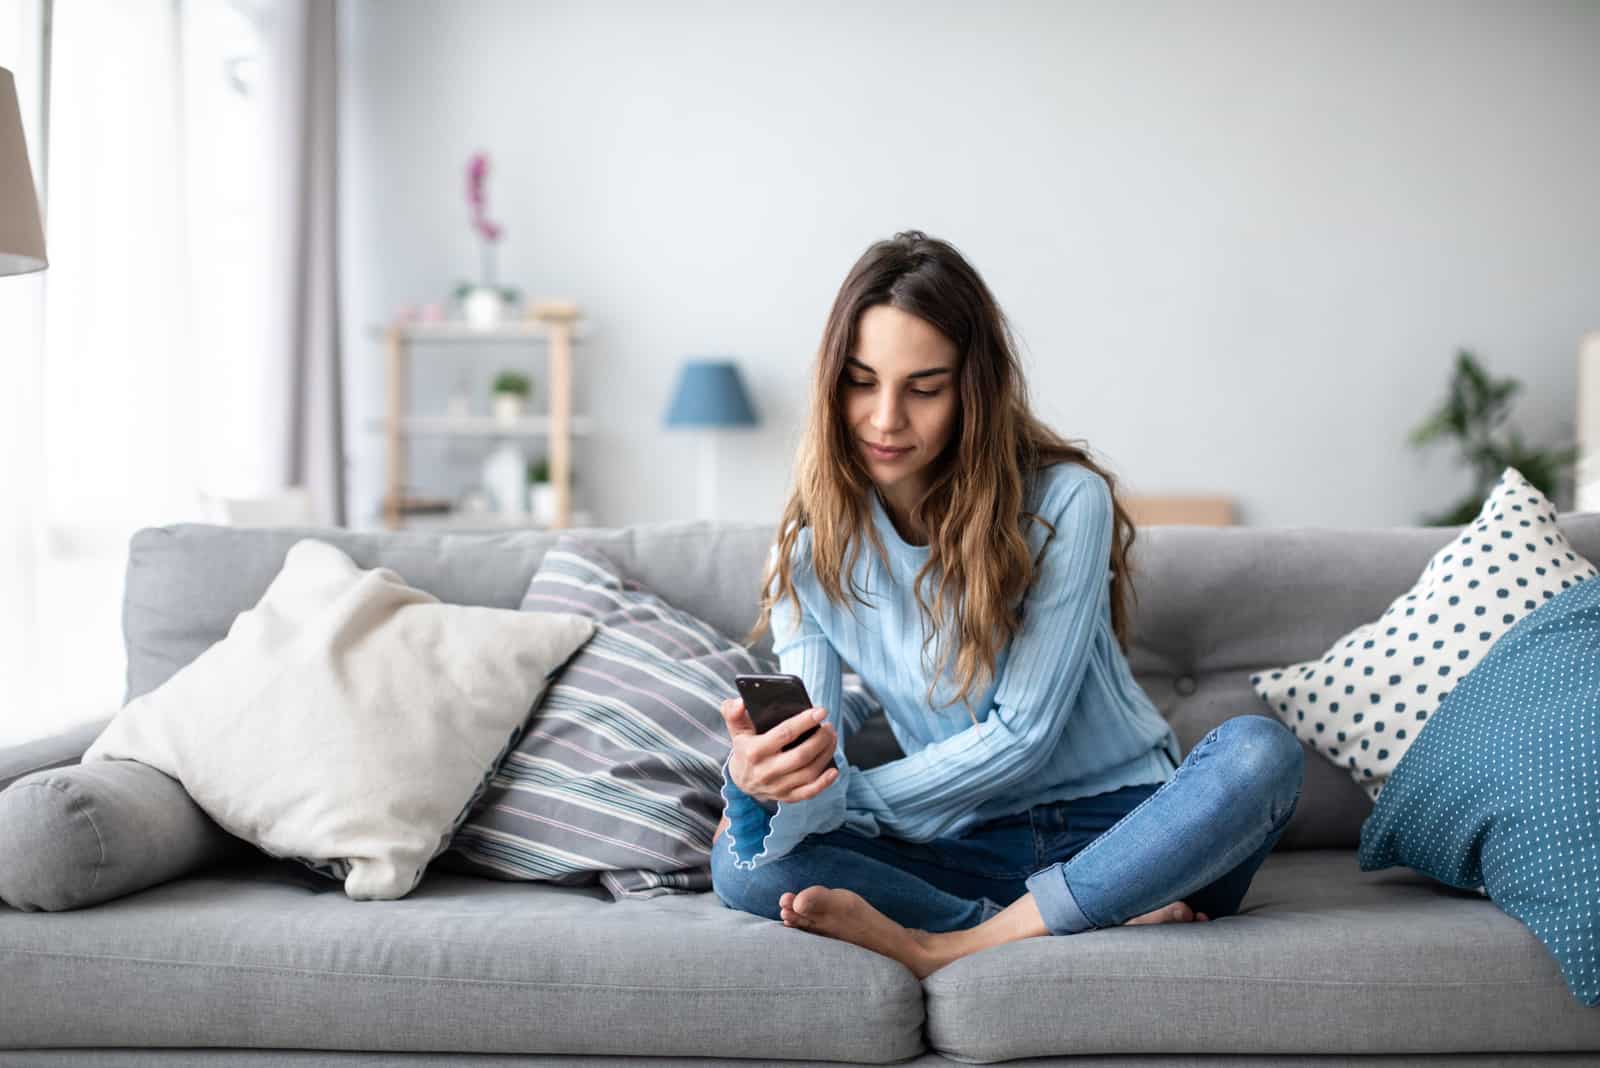 a woman with long brown hair sits on a couch and holds a phone in her hand